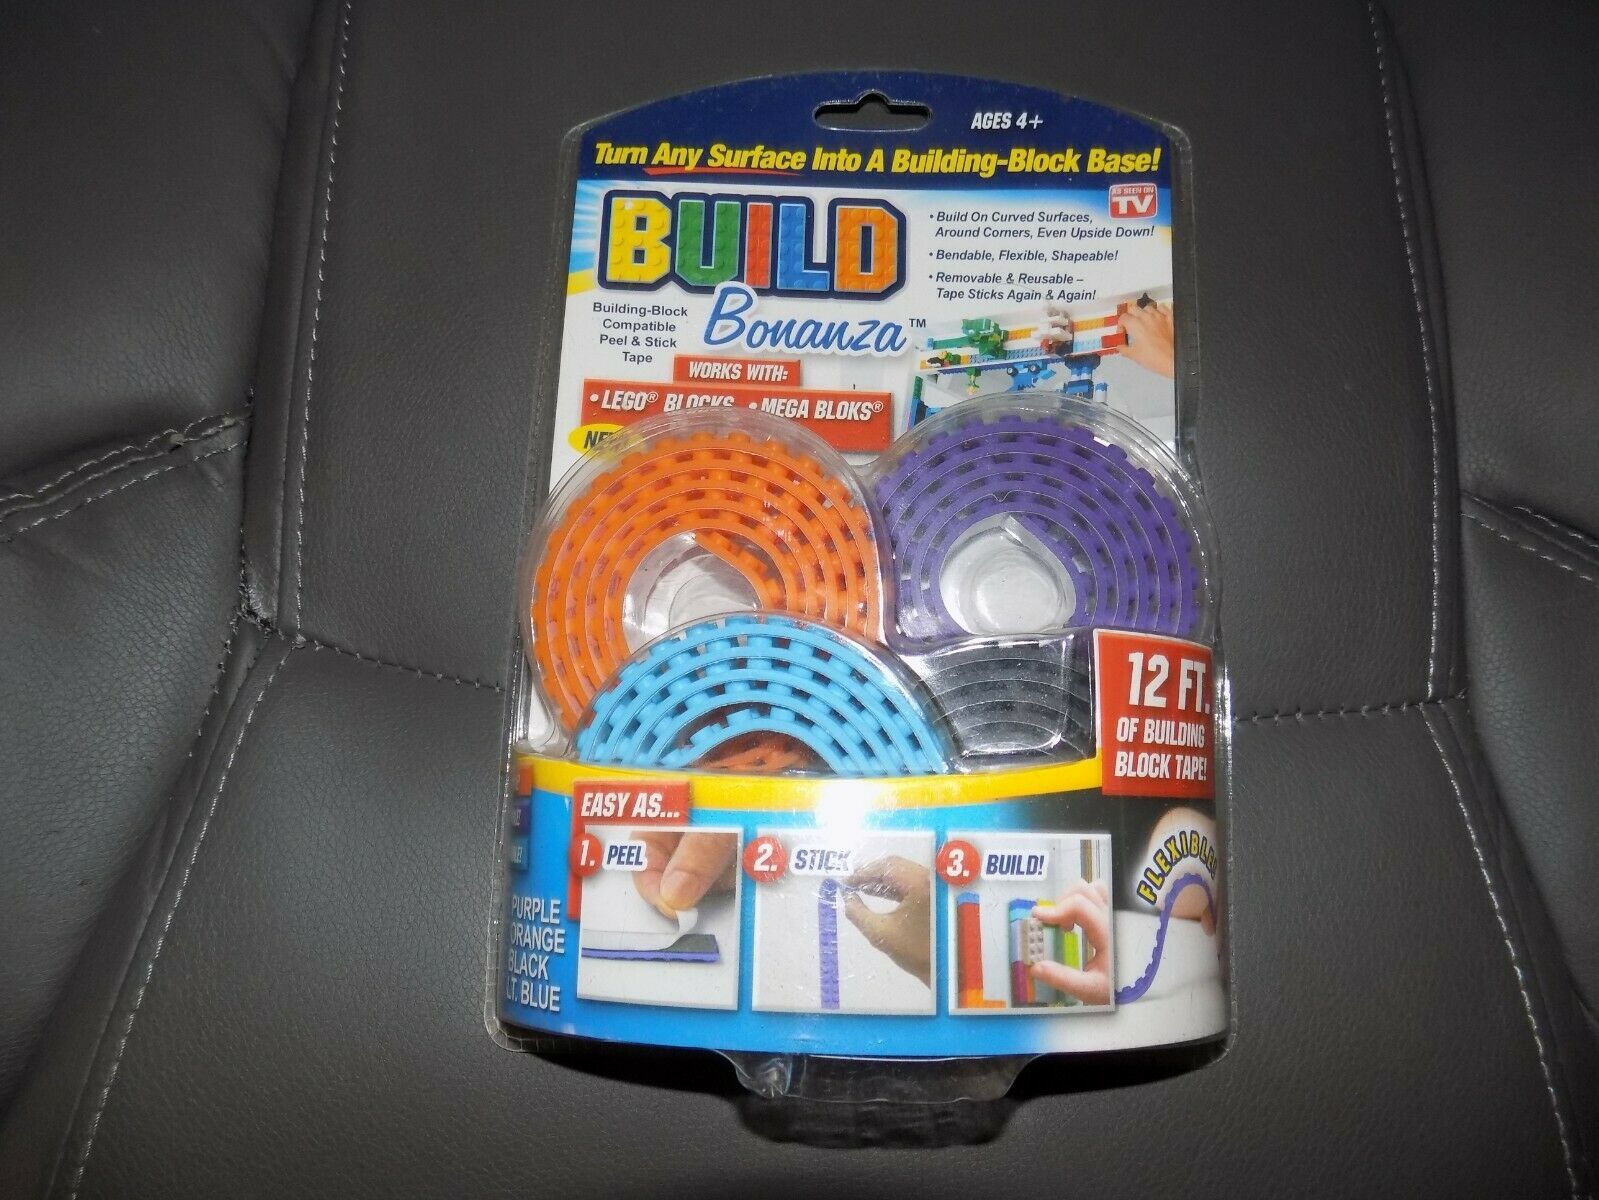 Build Bonanza Block Peel & Stick Tape Works With Lego and Mega Blocks 12ft for sale online